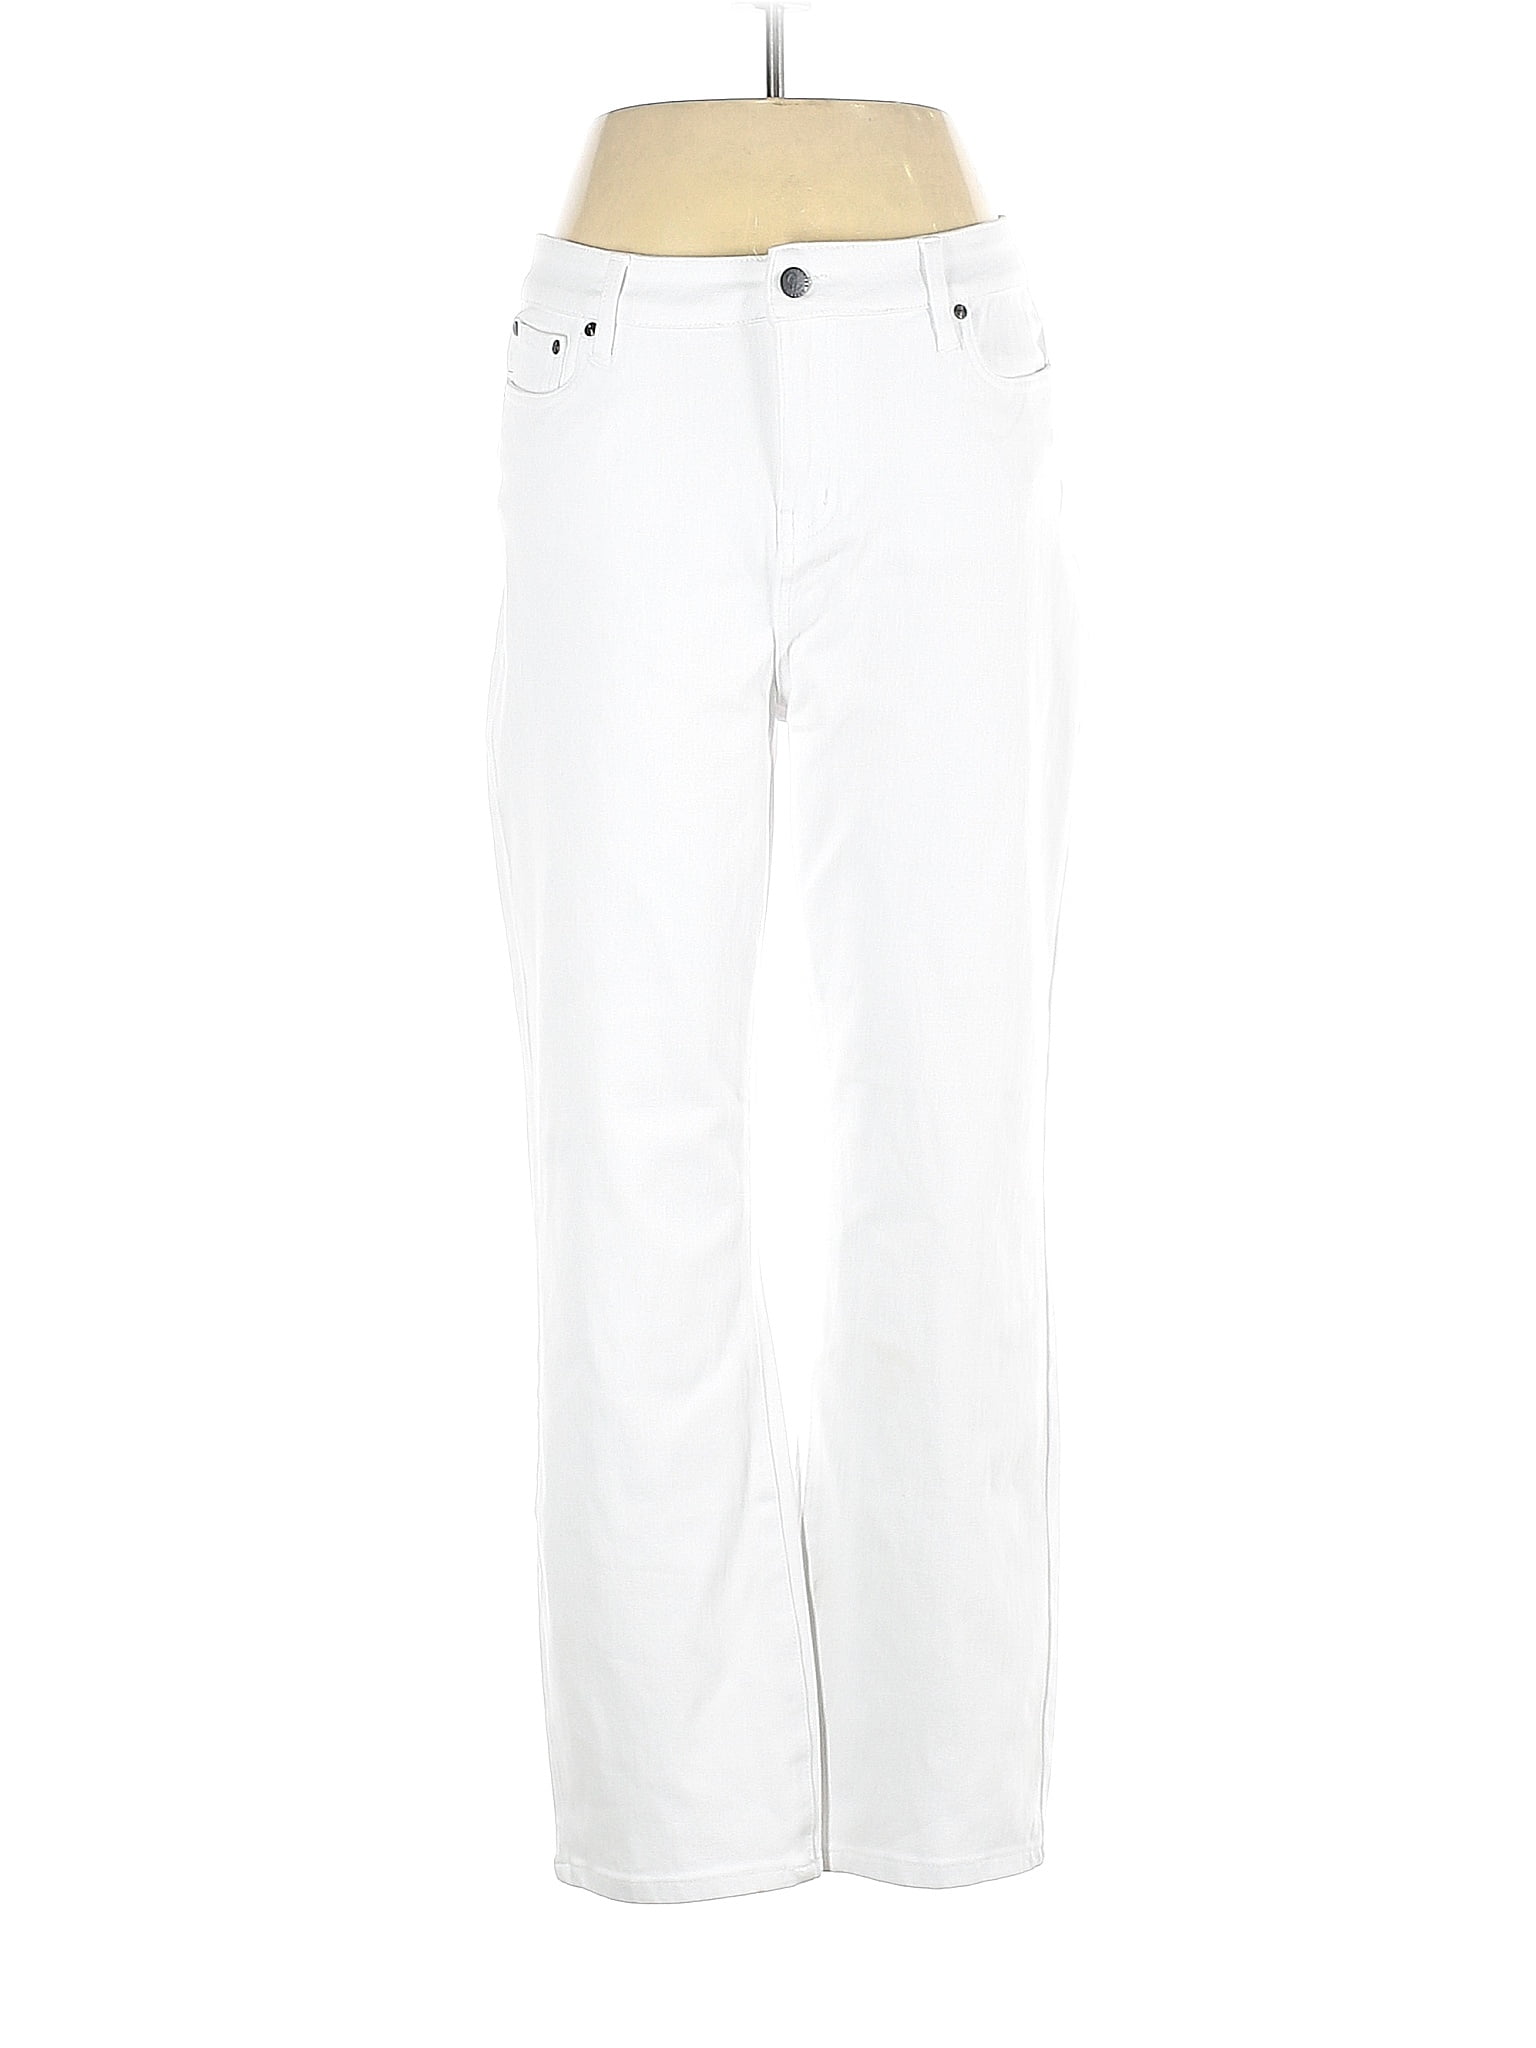 Coldwater Creek Solid White Jeans Size 12 (Petite) - 73% off | thredUP